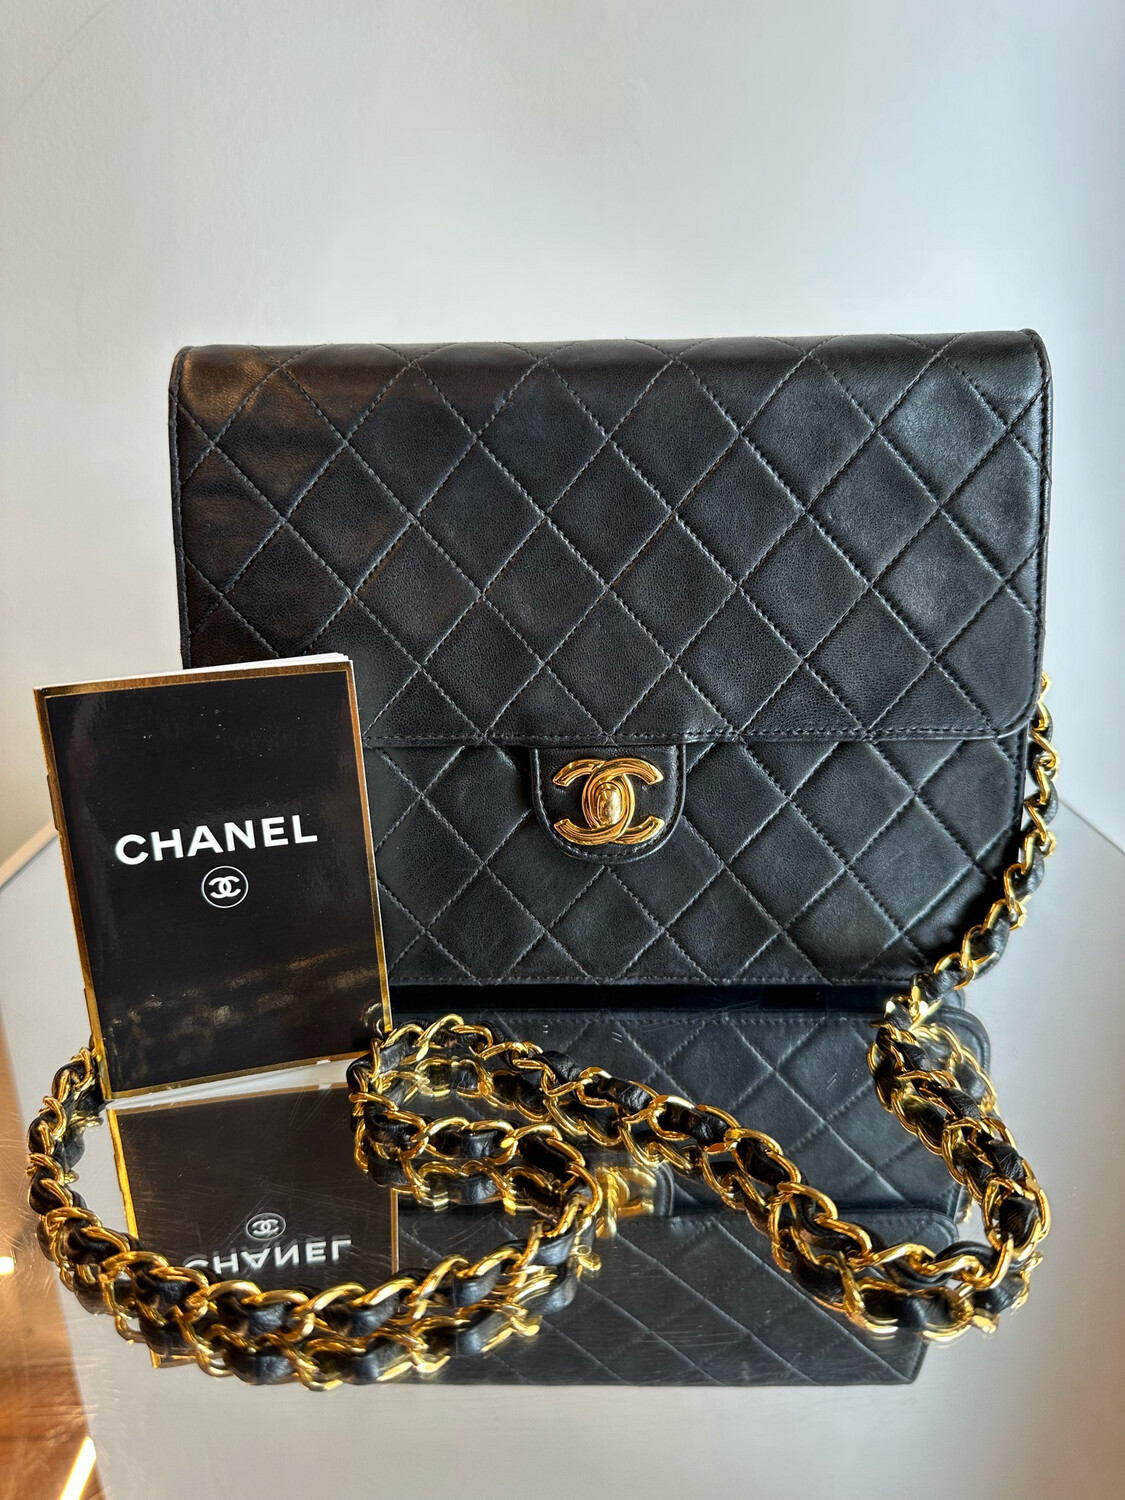 CHANEL TIMELESS CLASSIC VINTAGE ANNO 96/97